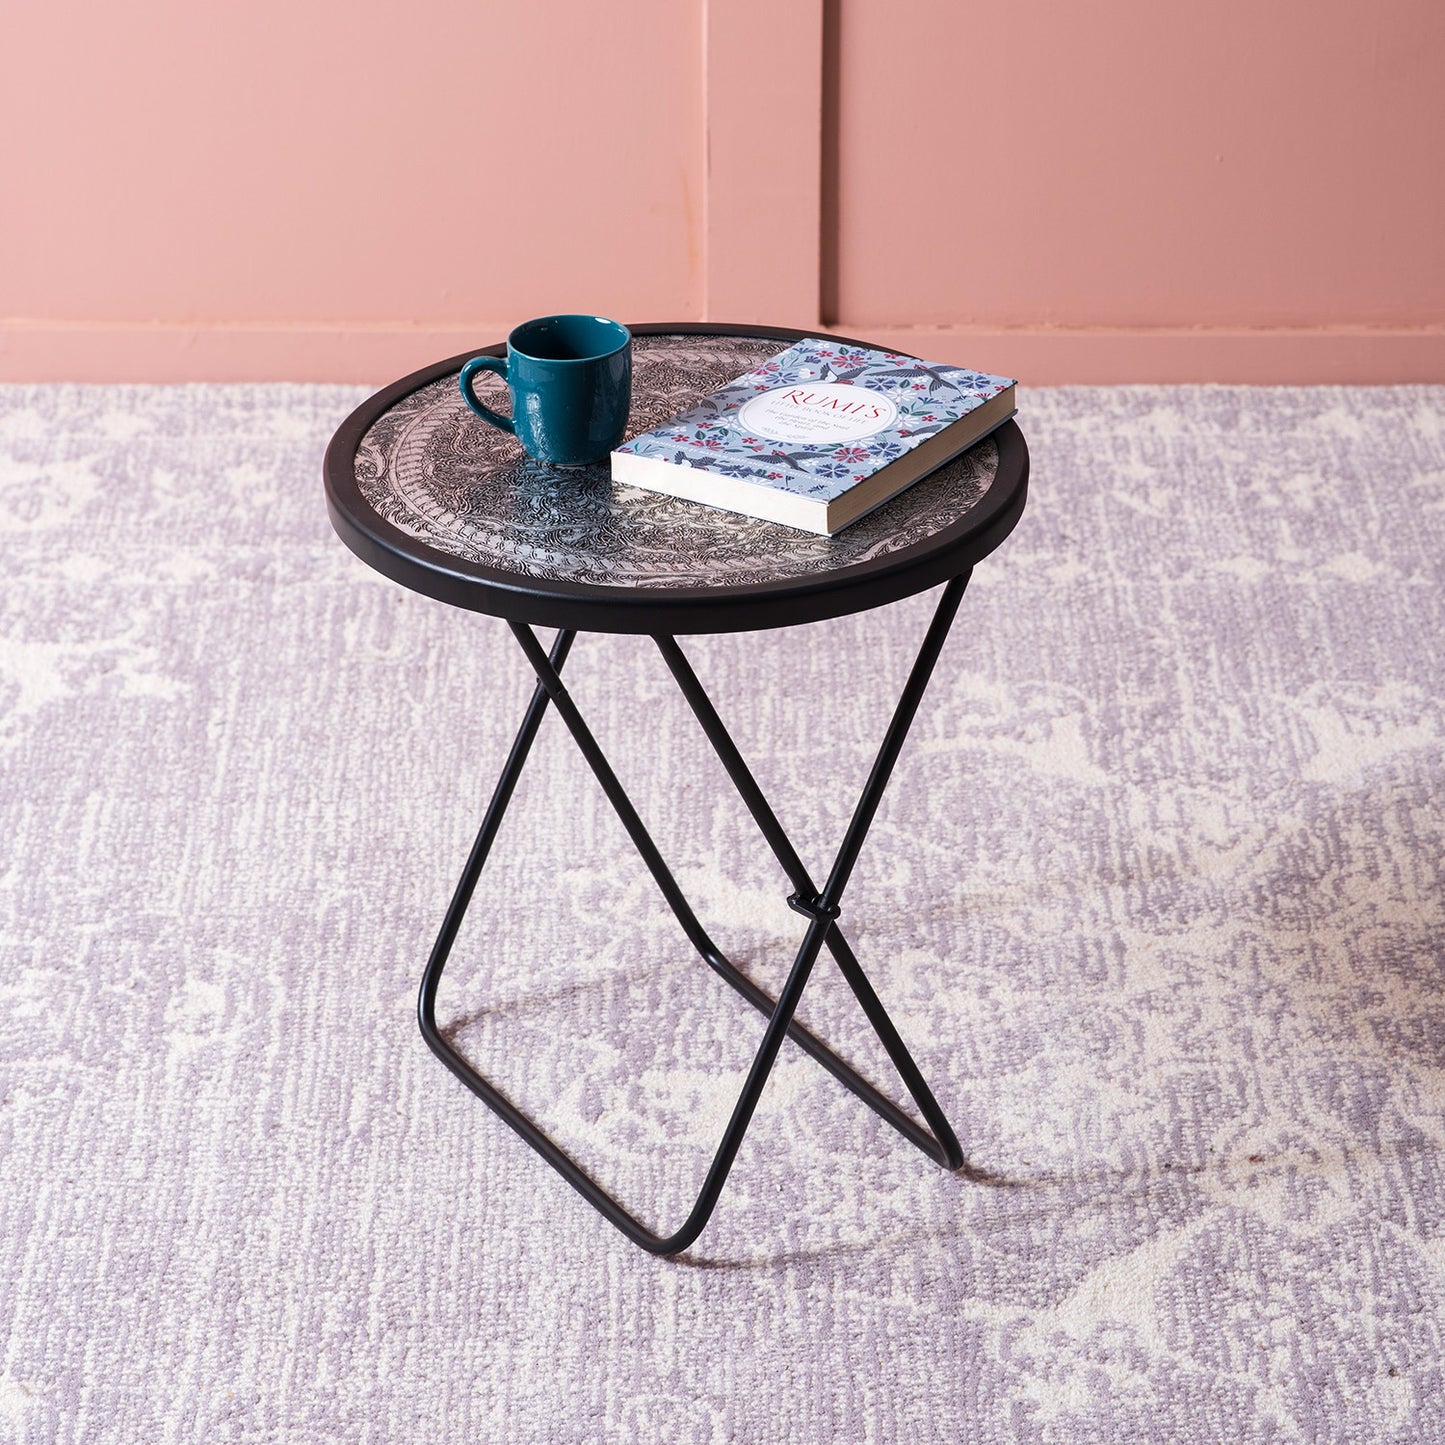 Silver Spectrum: Polished Foldable Side Table